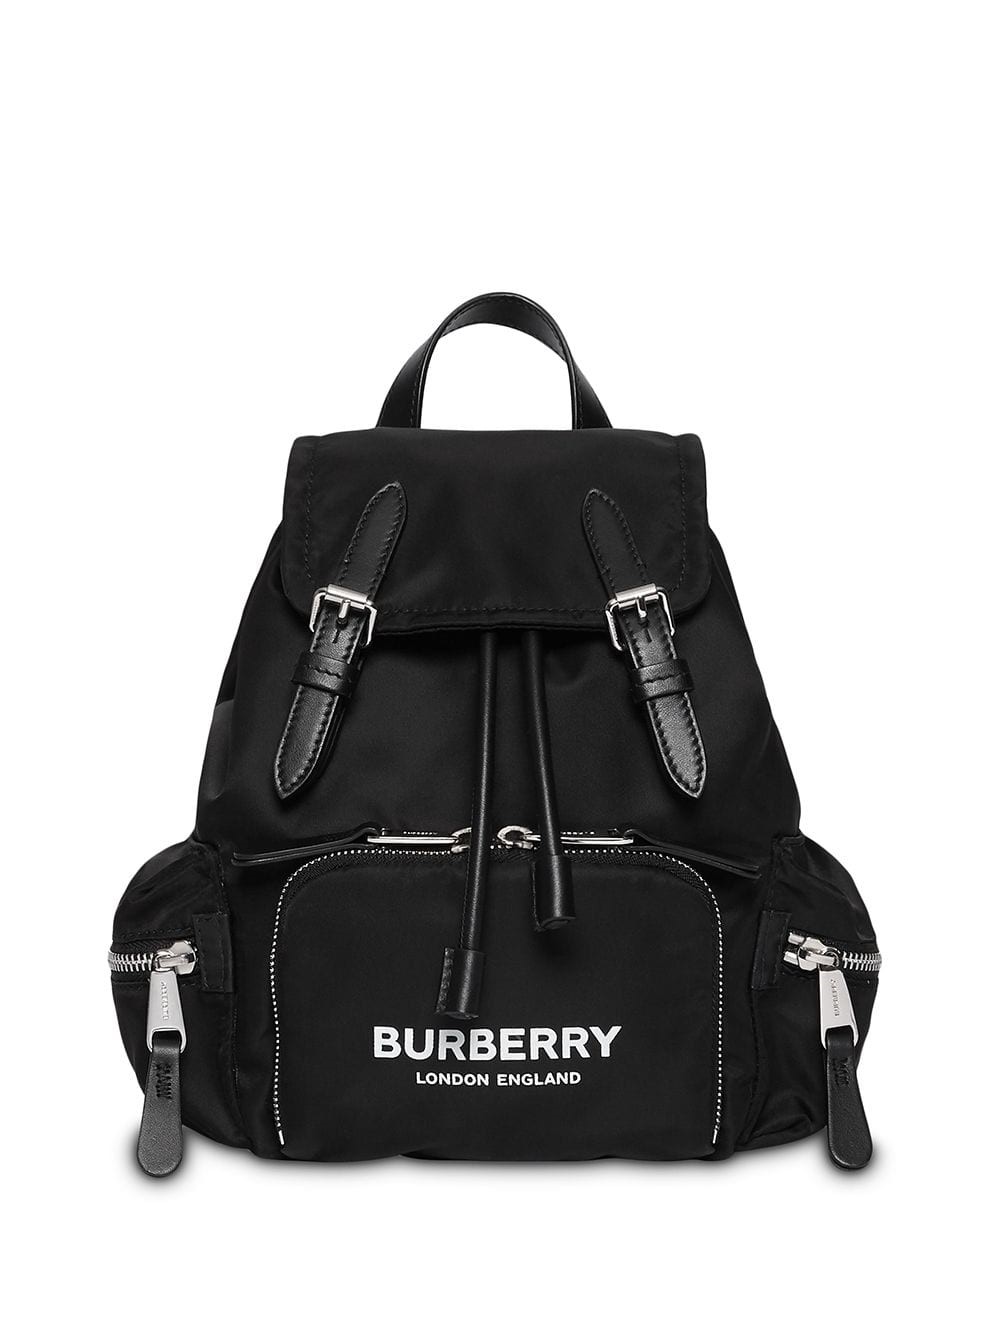 burberry LOGO NYLON BACKPACK available montiboutique.com - 29744